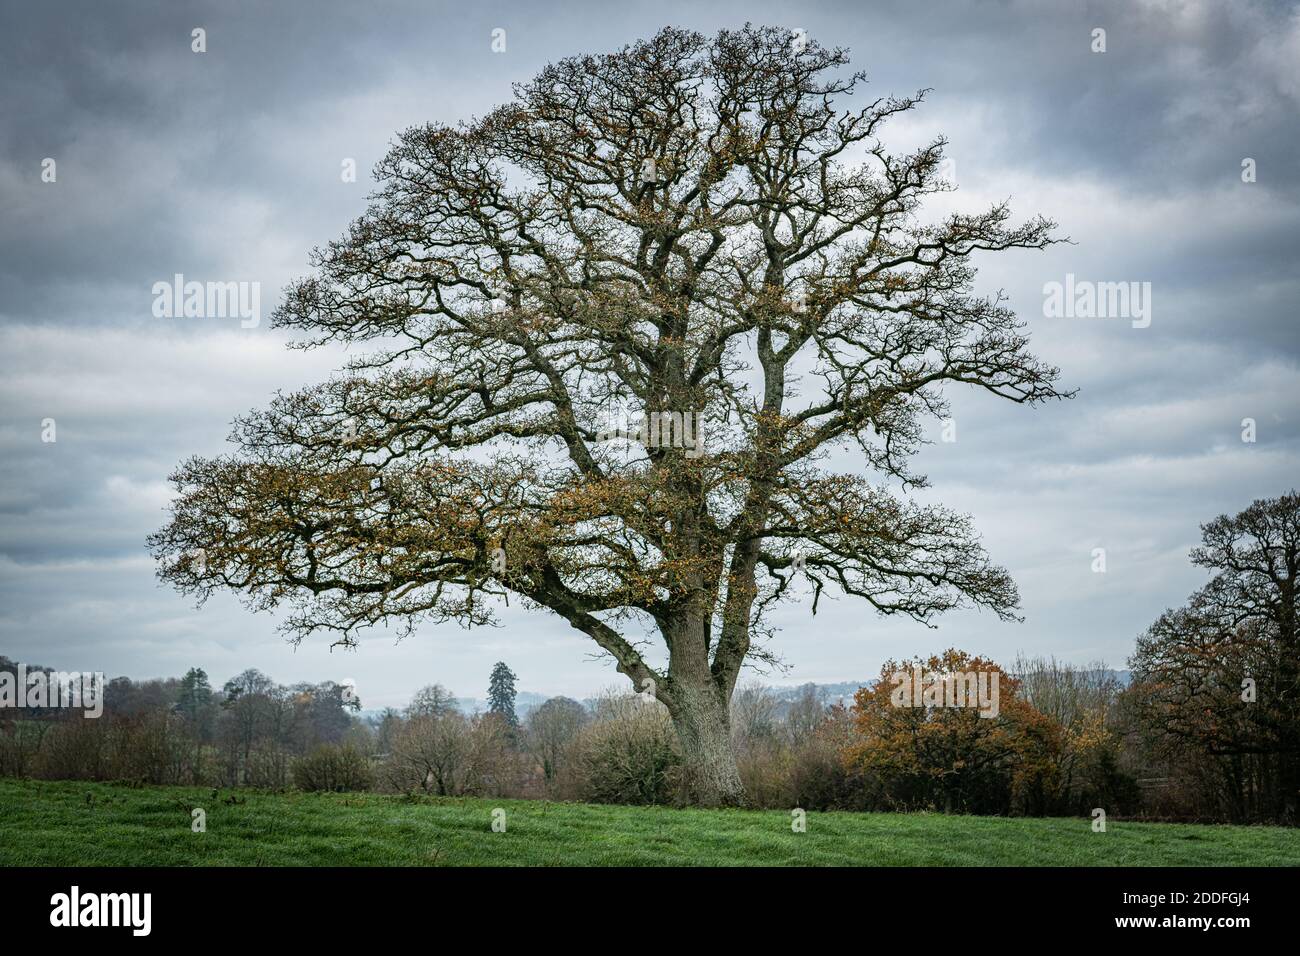 Solitary English Oak tree in the landscape Stock Photo